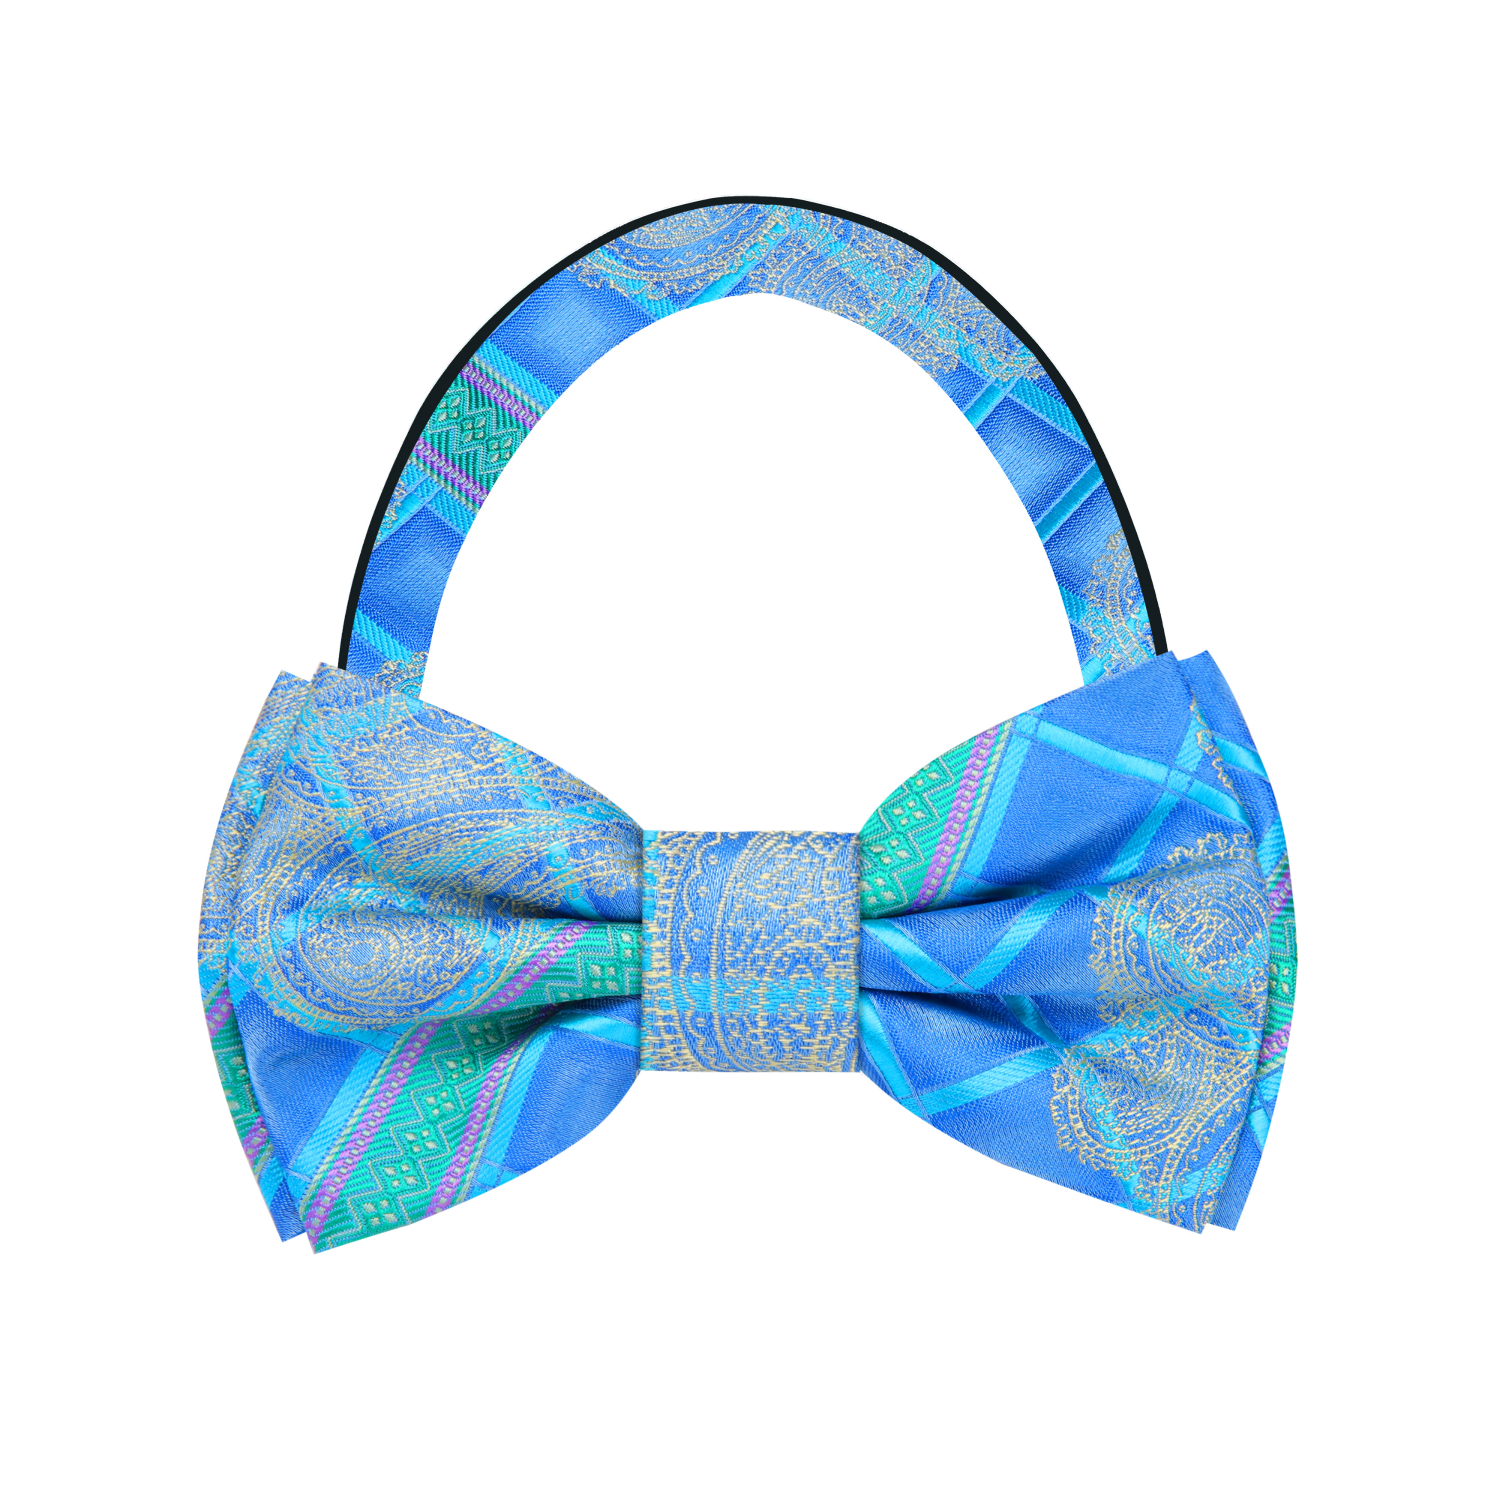 A Bold Olympic Blue, Aqua, Green Slate, Light Gold Abstract and Paisley Pattern Self Tie Bow Tie Pre Tied